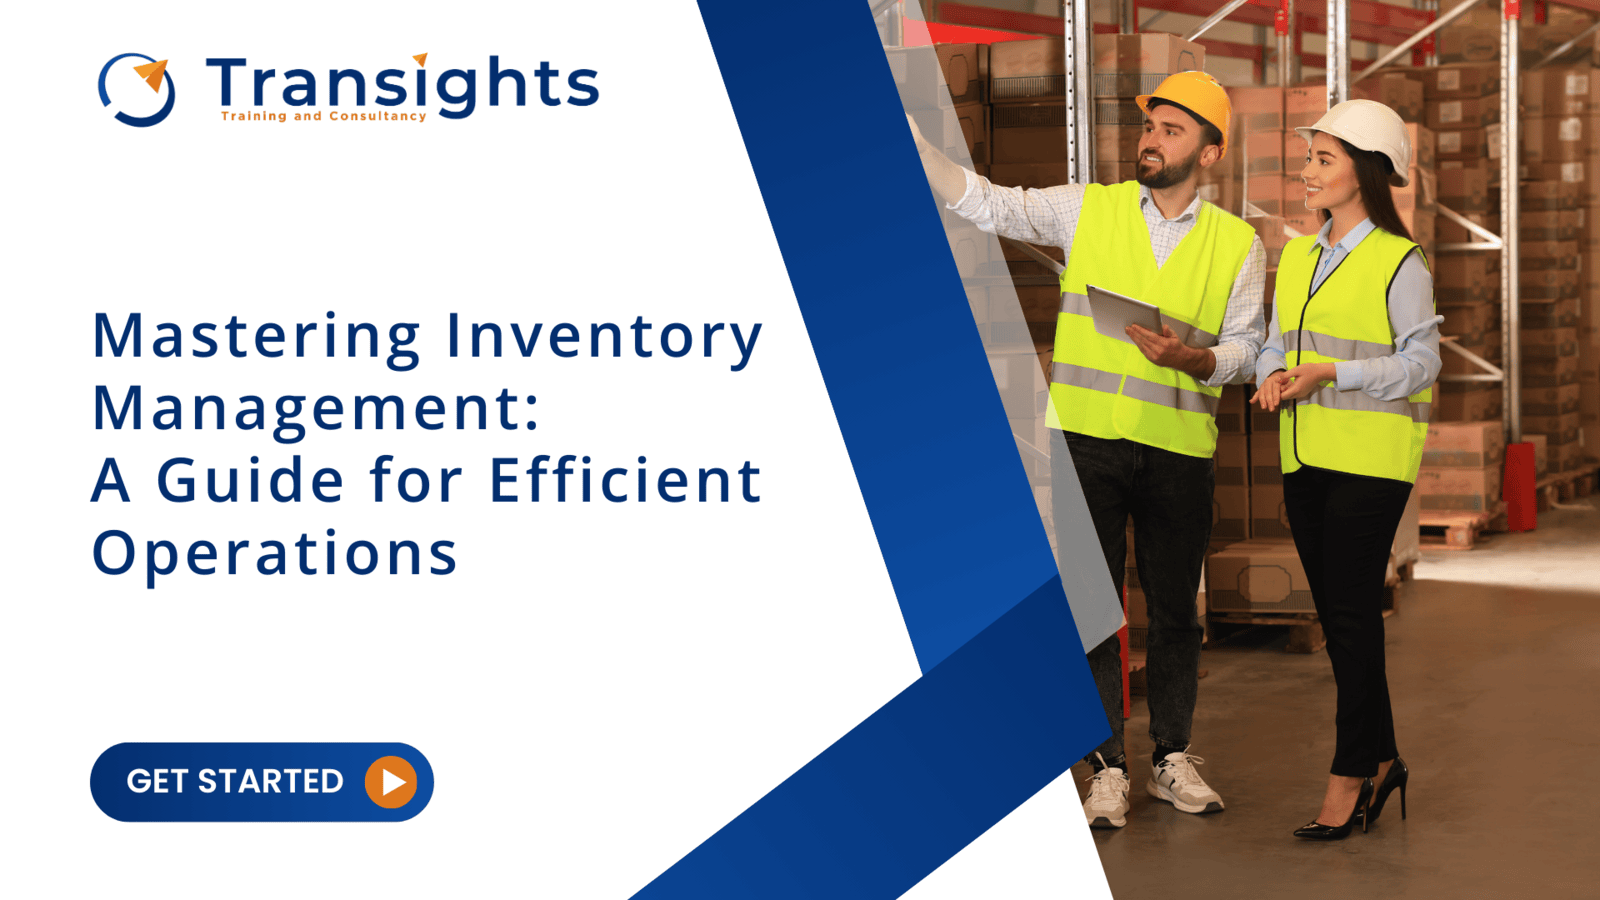 Mastering Inventory Management: A Guide for Efficient Operations